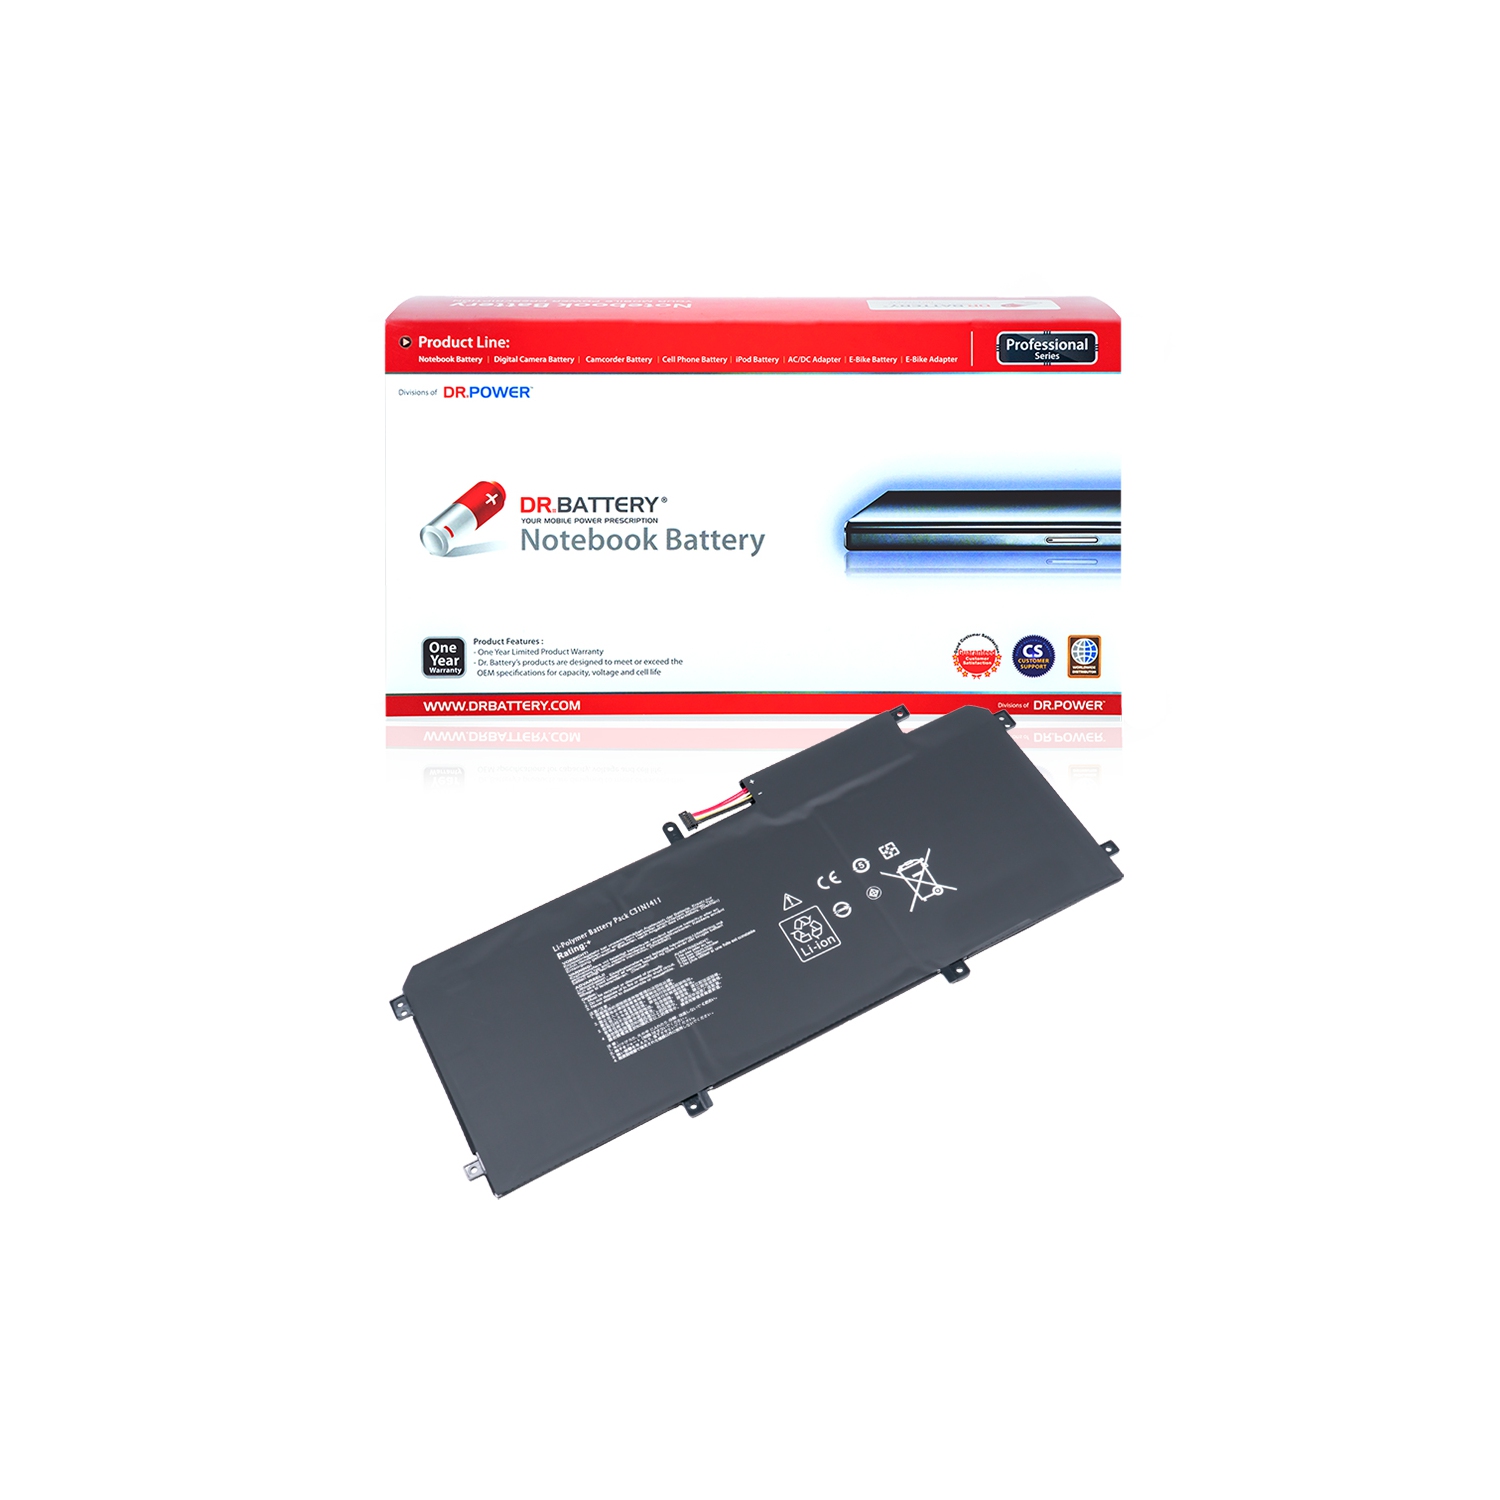 DR. BATTERY - Replacement for Asus ZenBook UX305CA-3C / UX305CA-DHM4T / UX305CA-EHM1 / 0B200-01180000 / C31N1411 [11.4V / 3830mAh / 43.6Wh] ***Free Shipping***